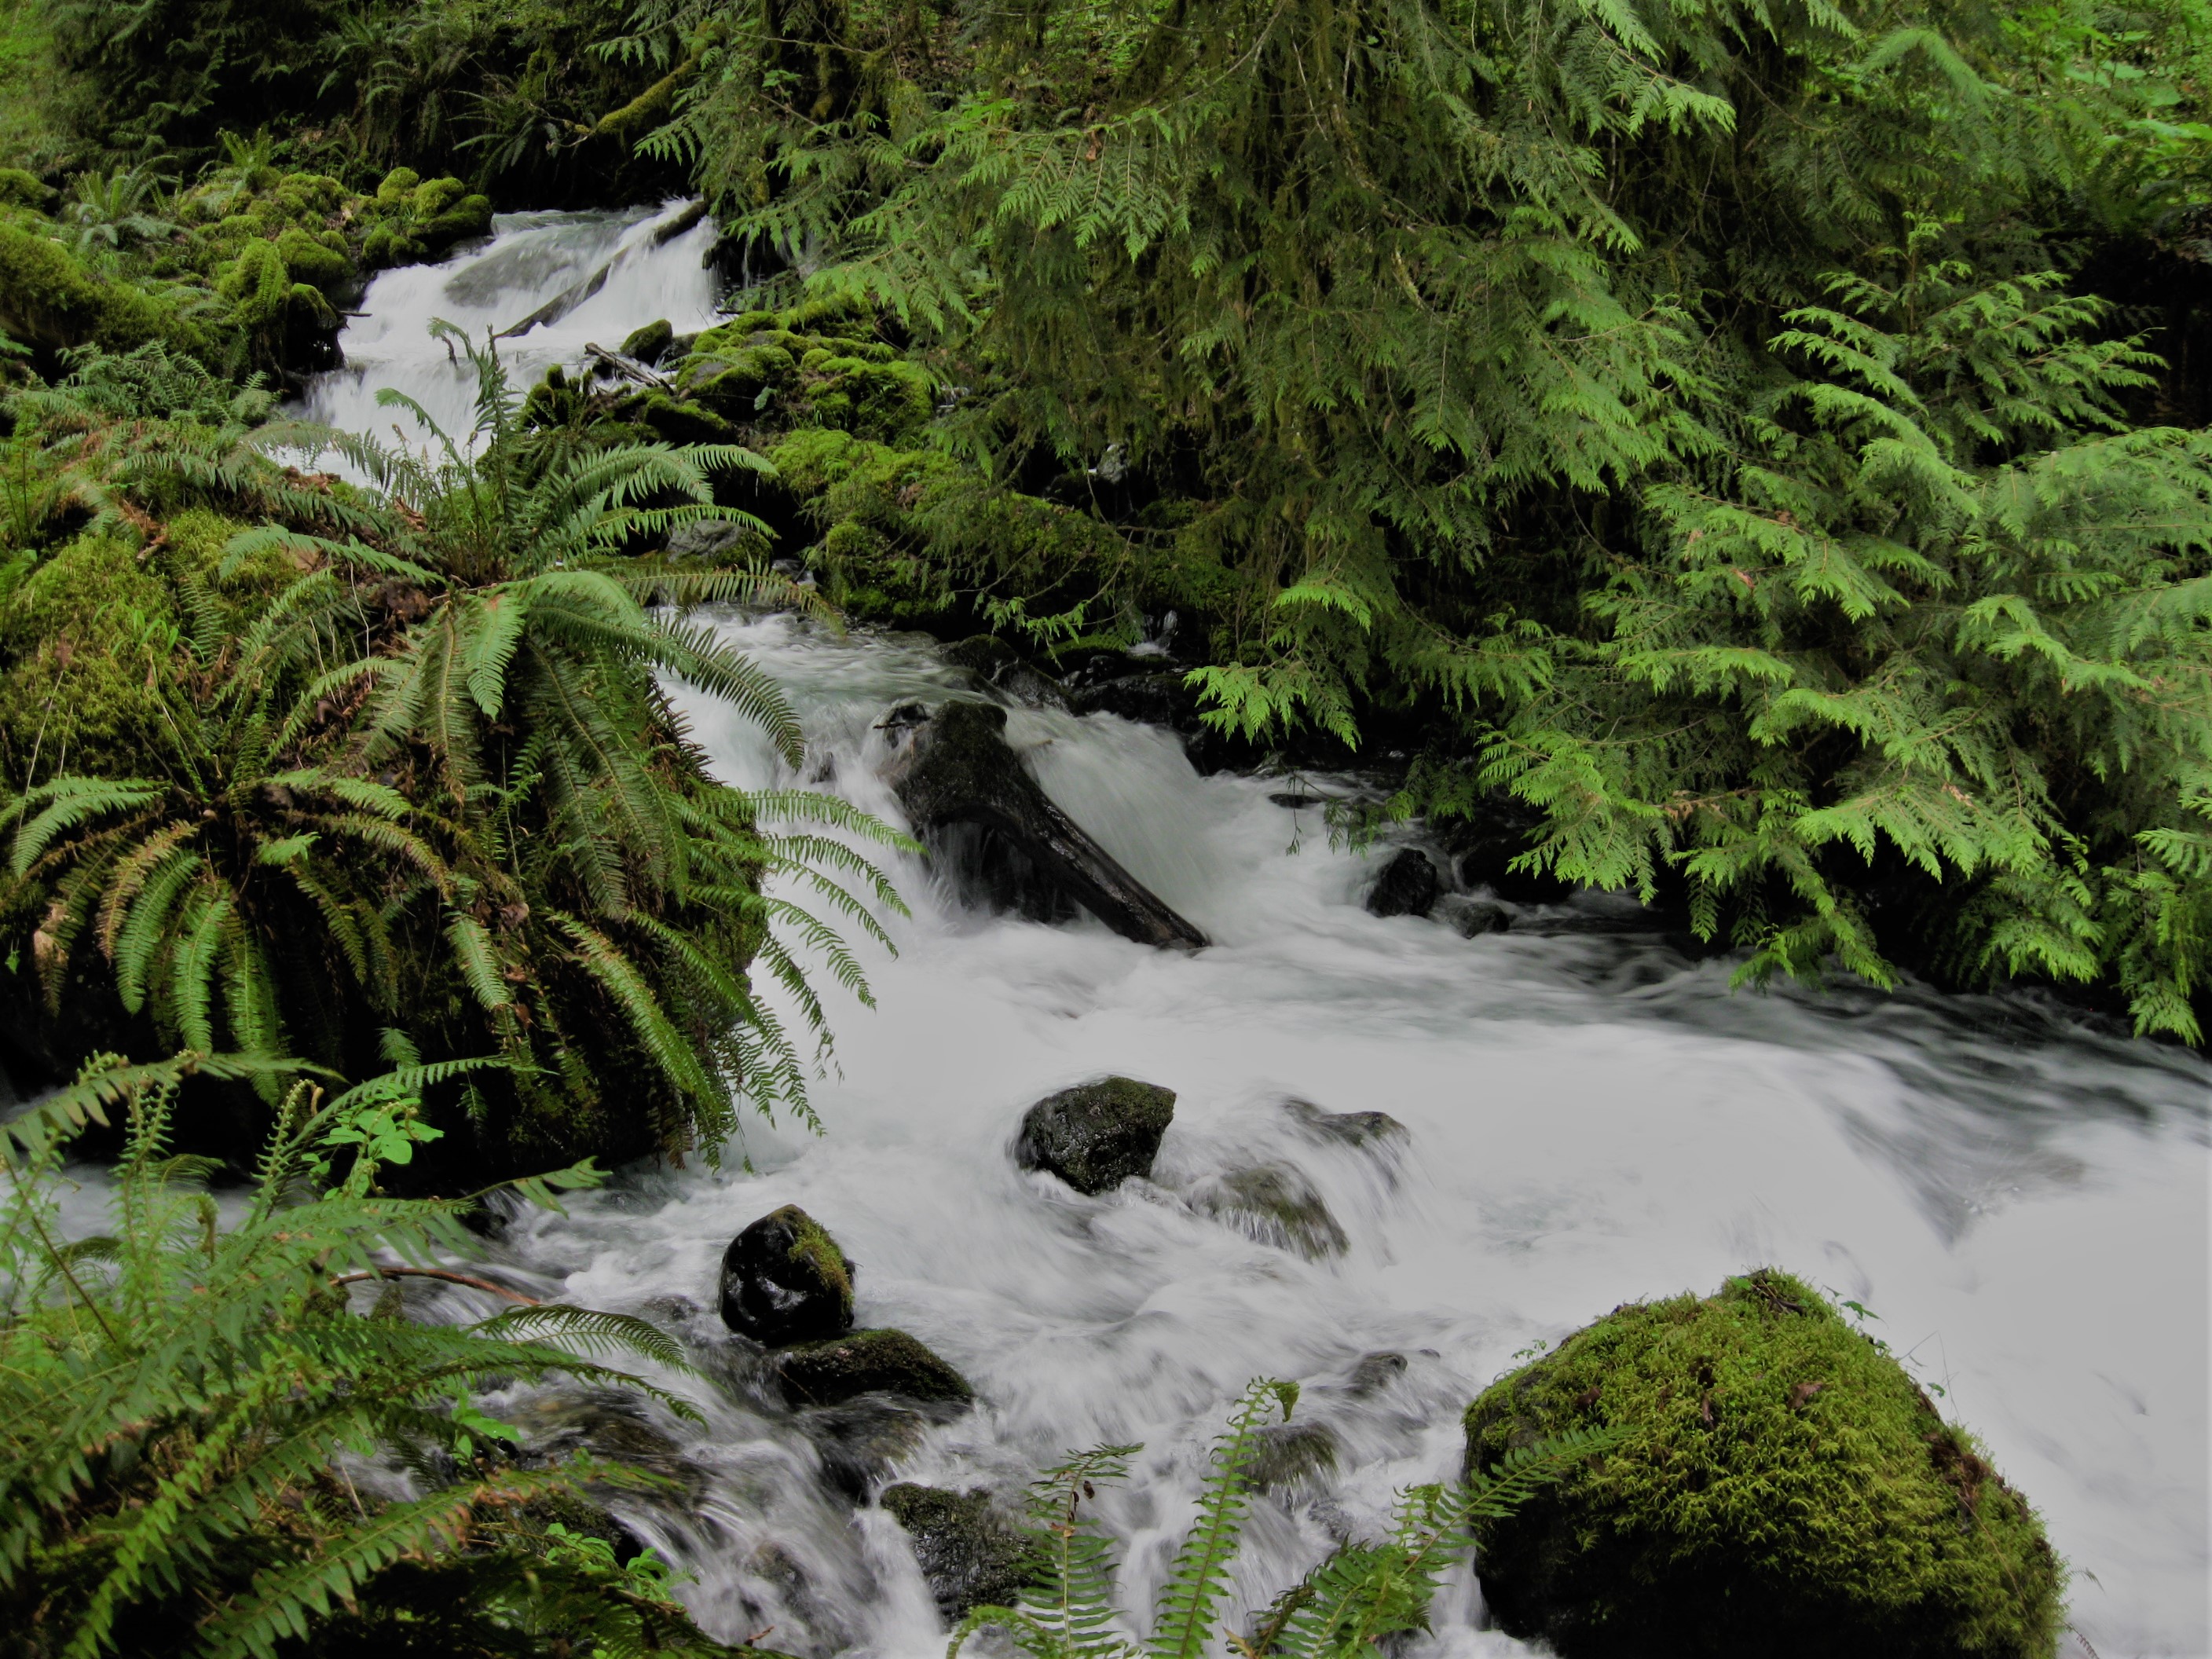 Less than a mile from the parking area, Barr Creek cascades through lowland forests. Photograph credit: Skagit Land Trust staff.